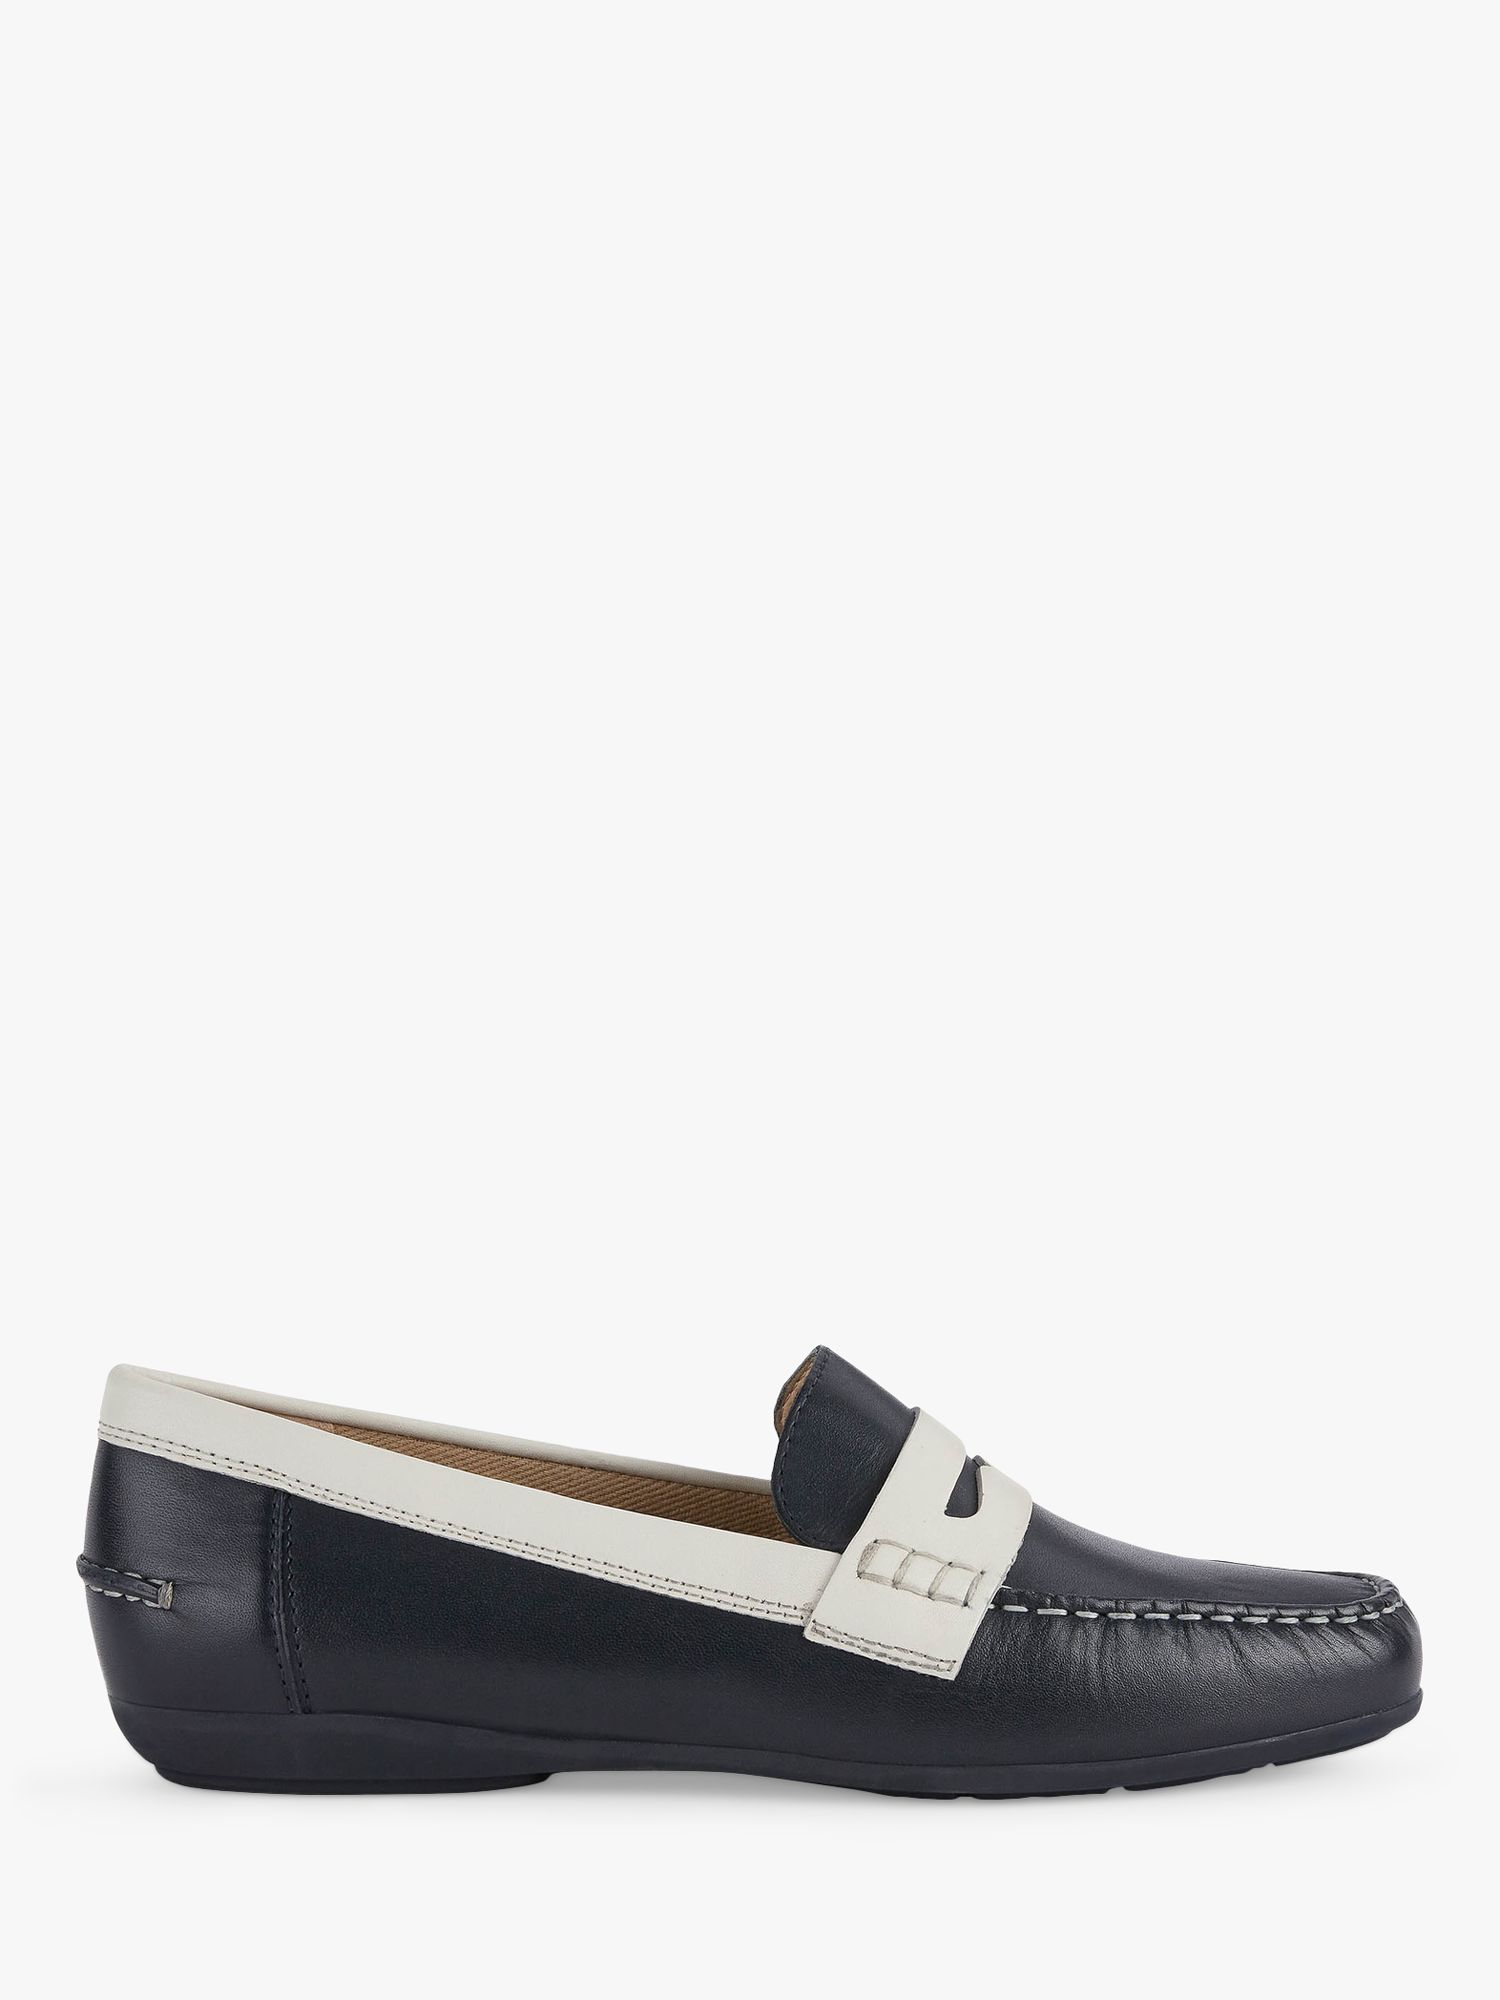 Dramaturgo bosquejo Conmoción Geox Women's Annytah Wide Fit Leather Moccasins, Dark Jeans/White at John  Lewis & Partners